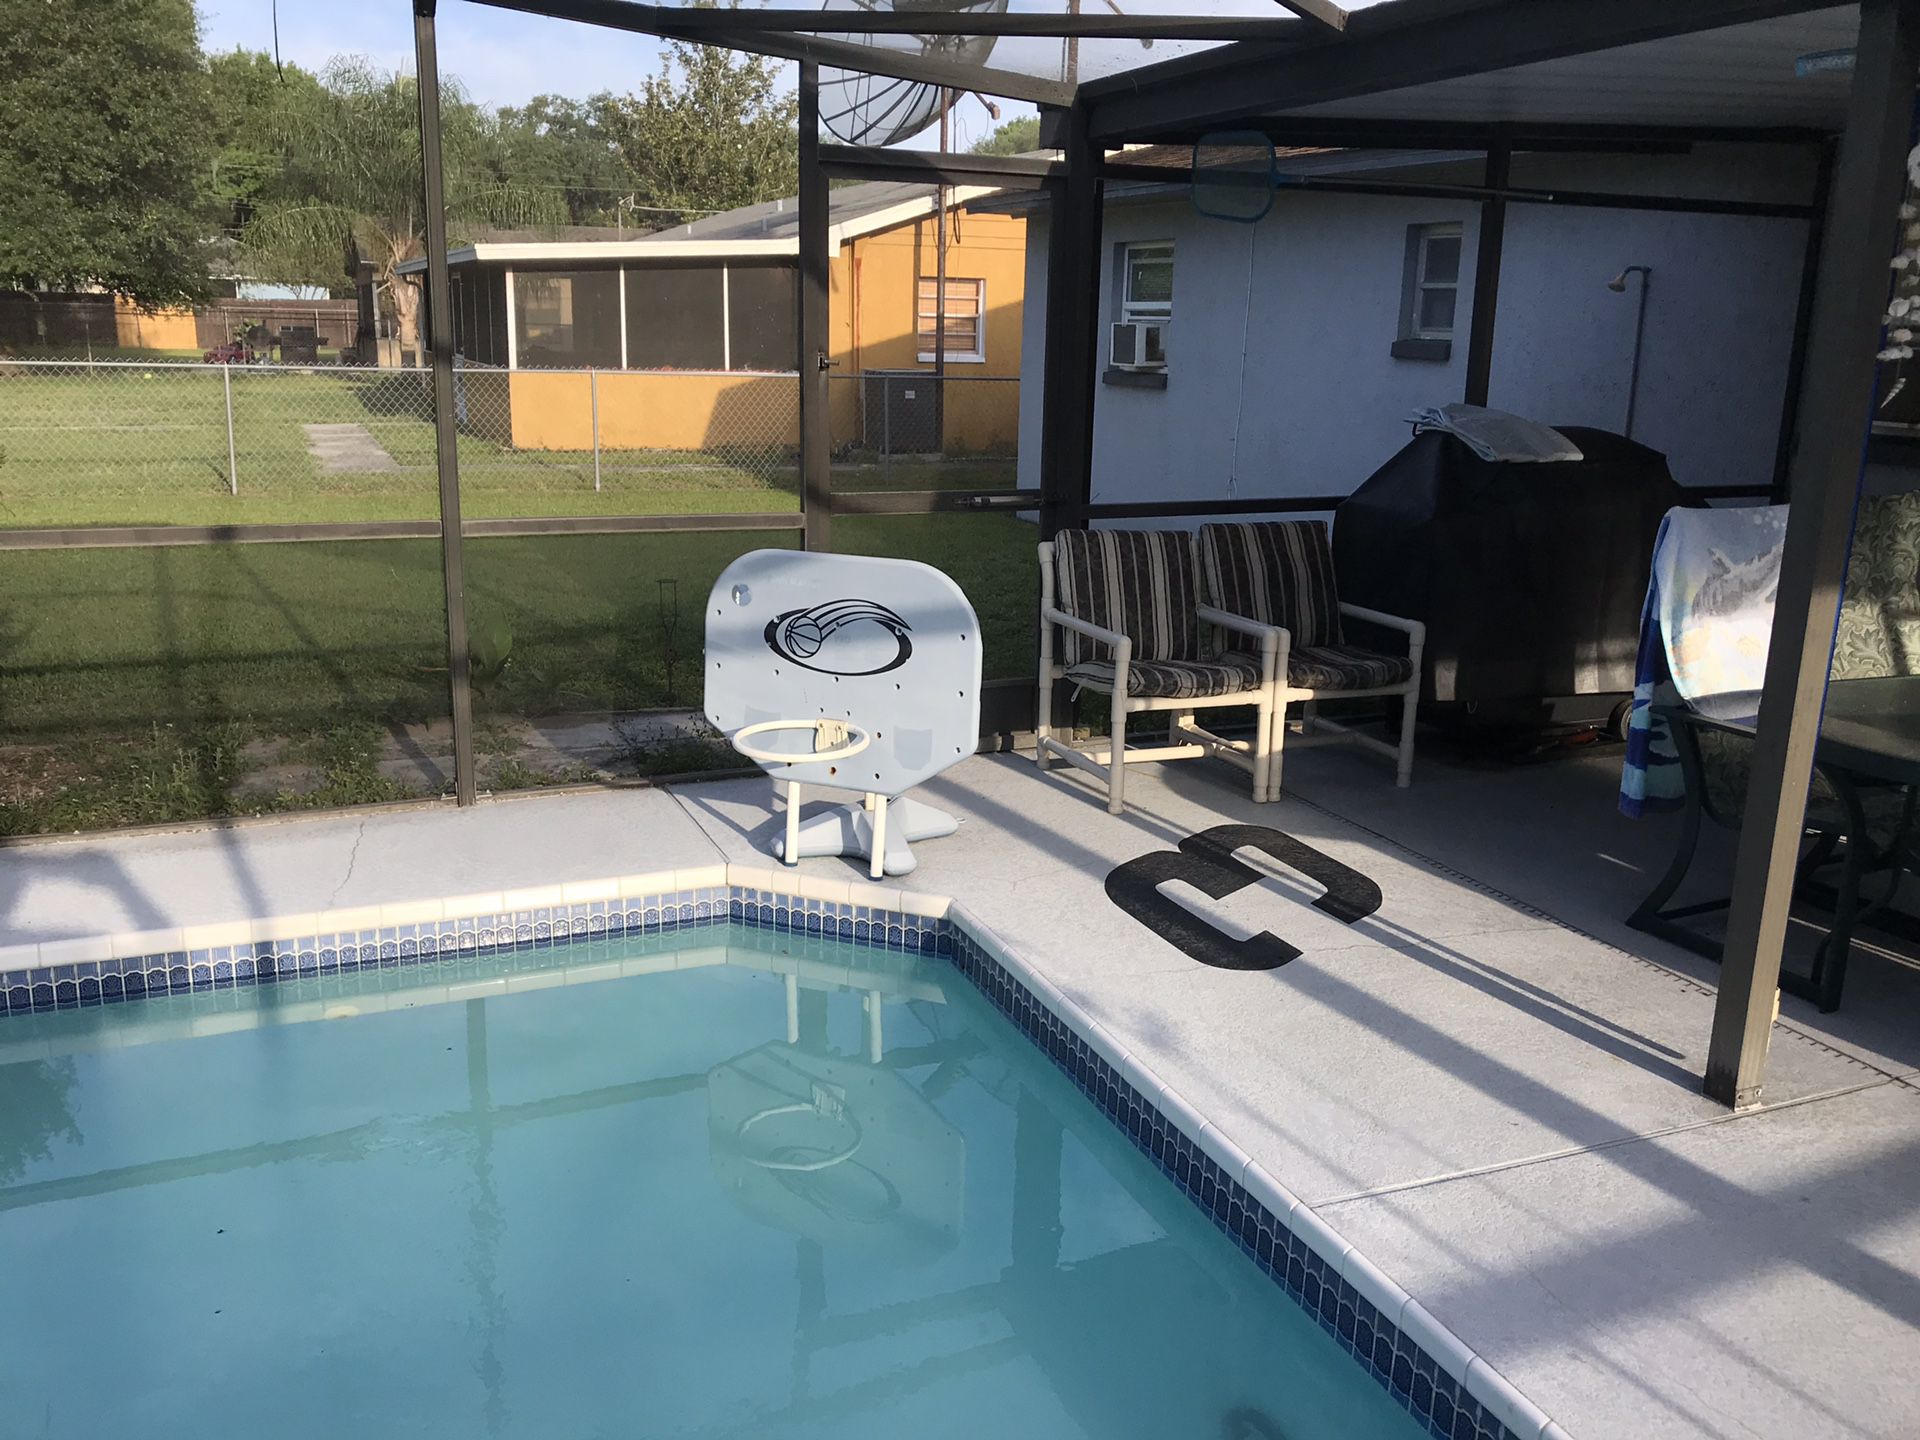 Pool basketball stand with 2 new nets